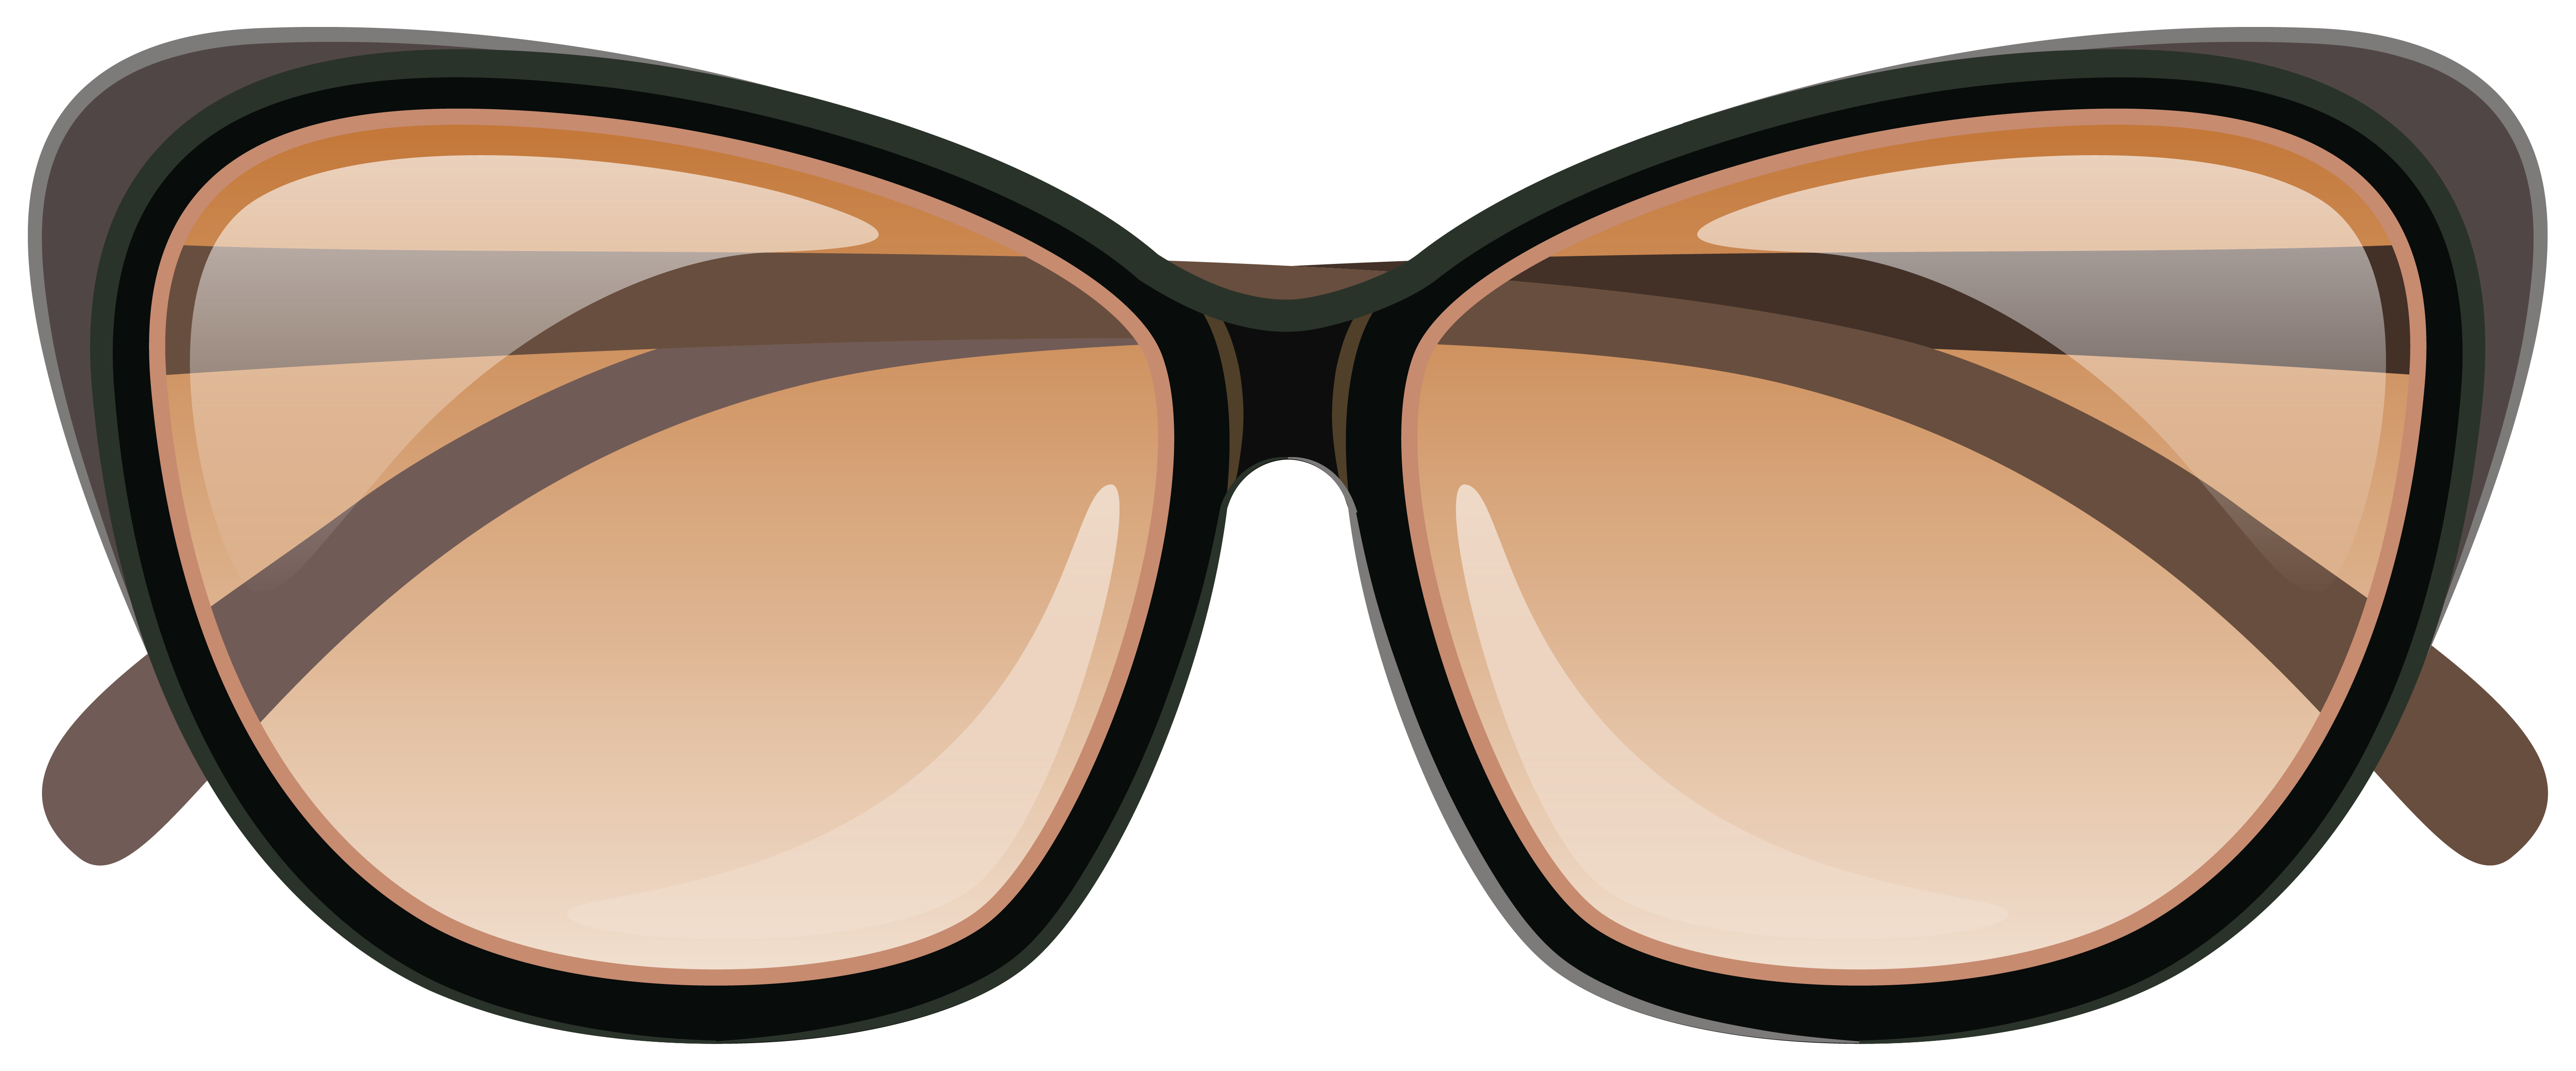 Brown png image gallery. Sunglasses clipart goggle